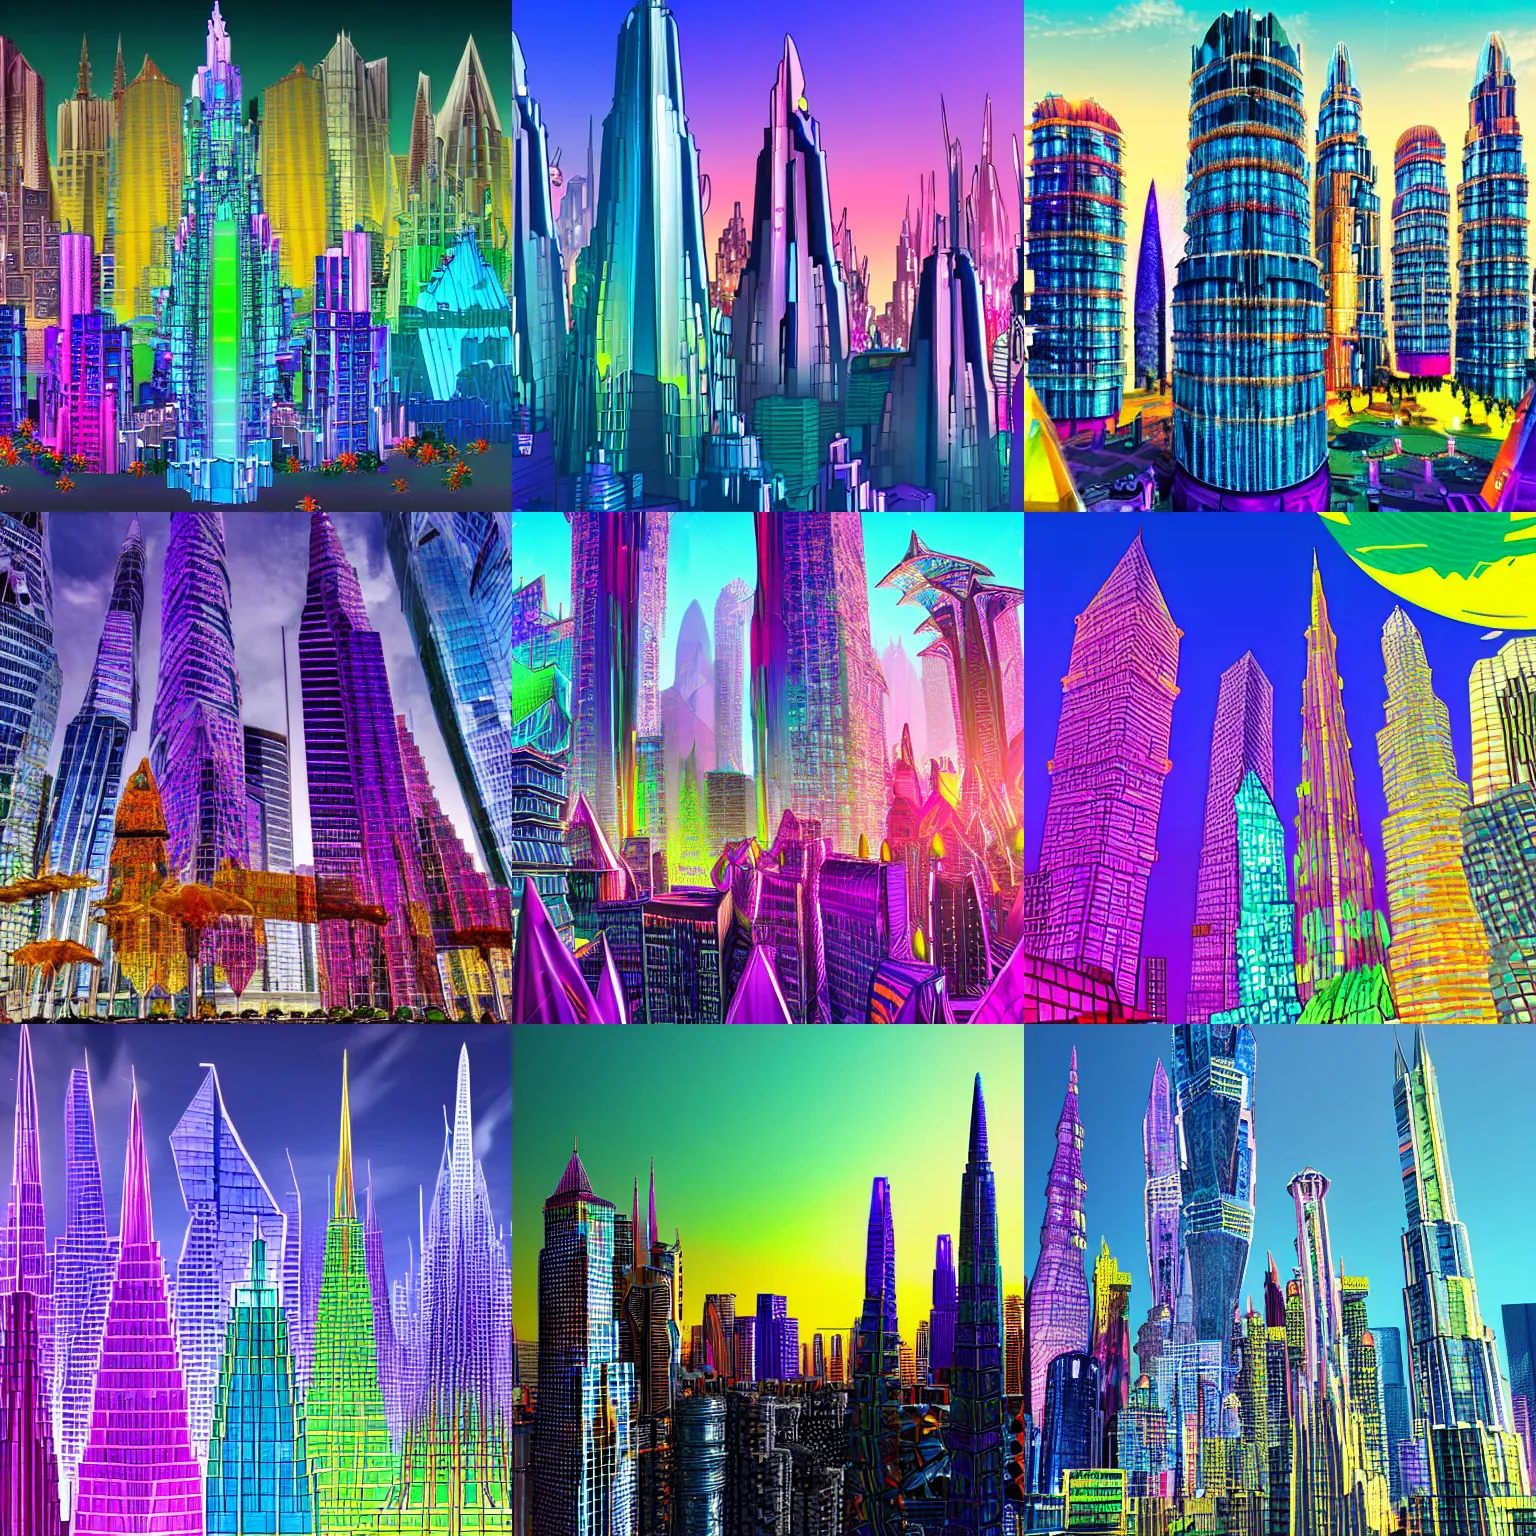 Prompt: an epic colorful alien crystal city with many spires and skyscrapers